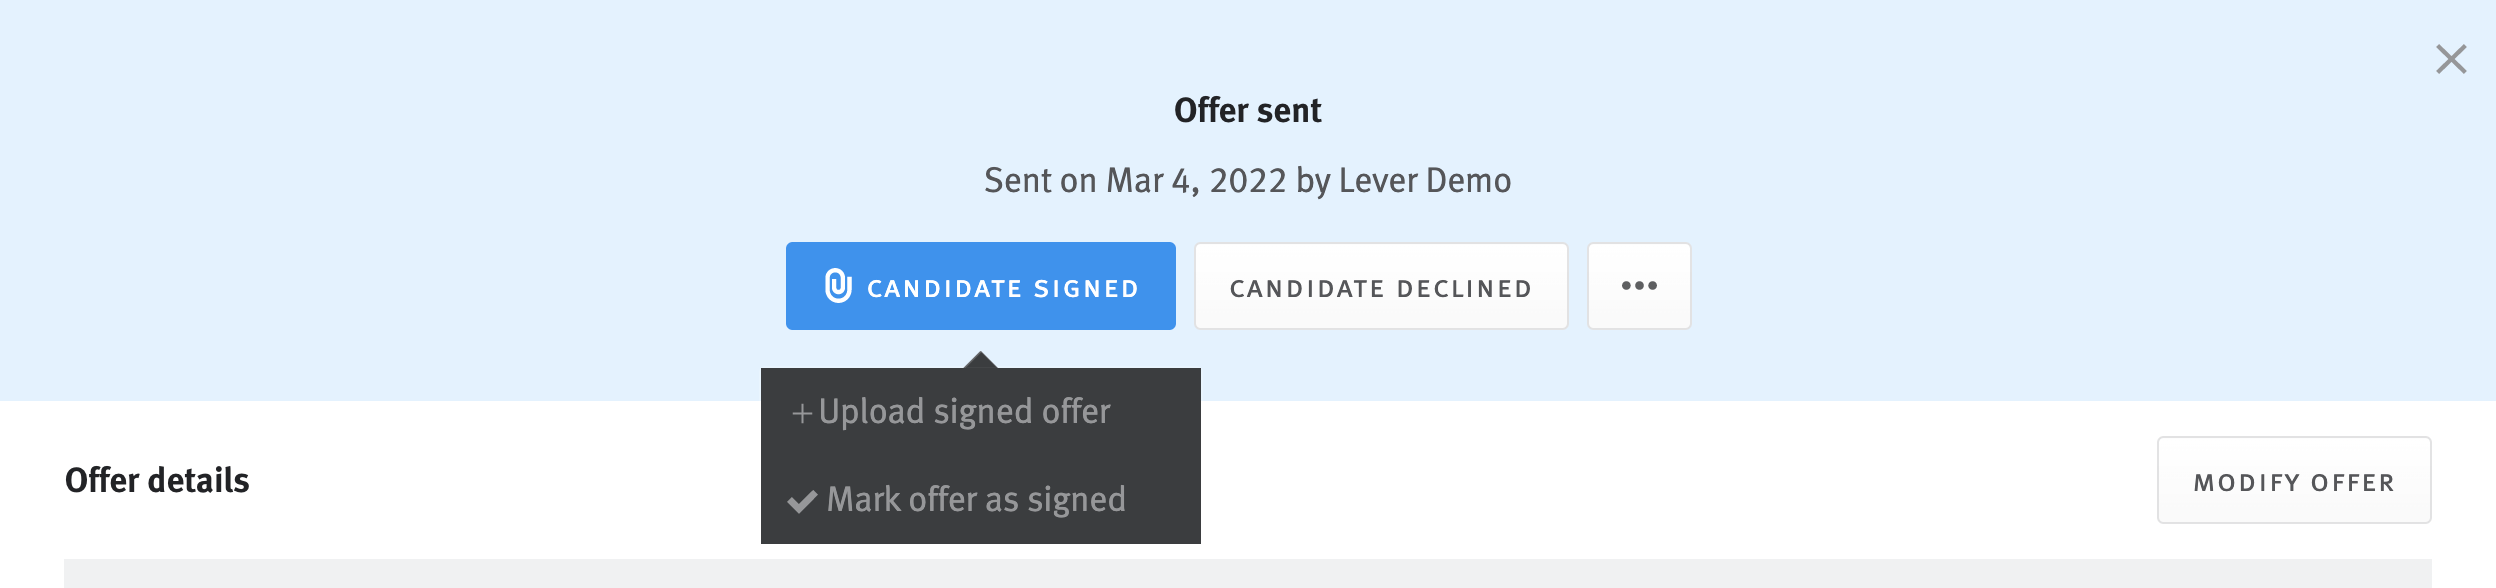 Offer sent notice in offer generation modal above buttons labelled candidate signed and candidate declided. Pop-over extends from candidate signed button with options to upload signed offer or mark offer as signed.